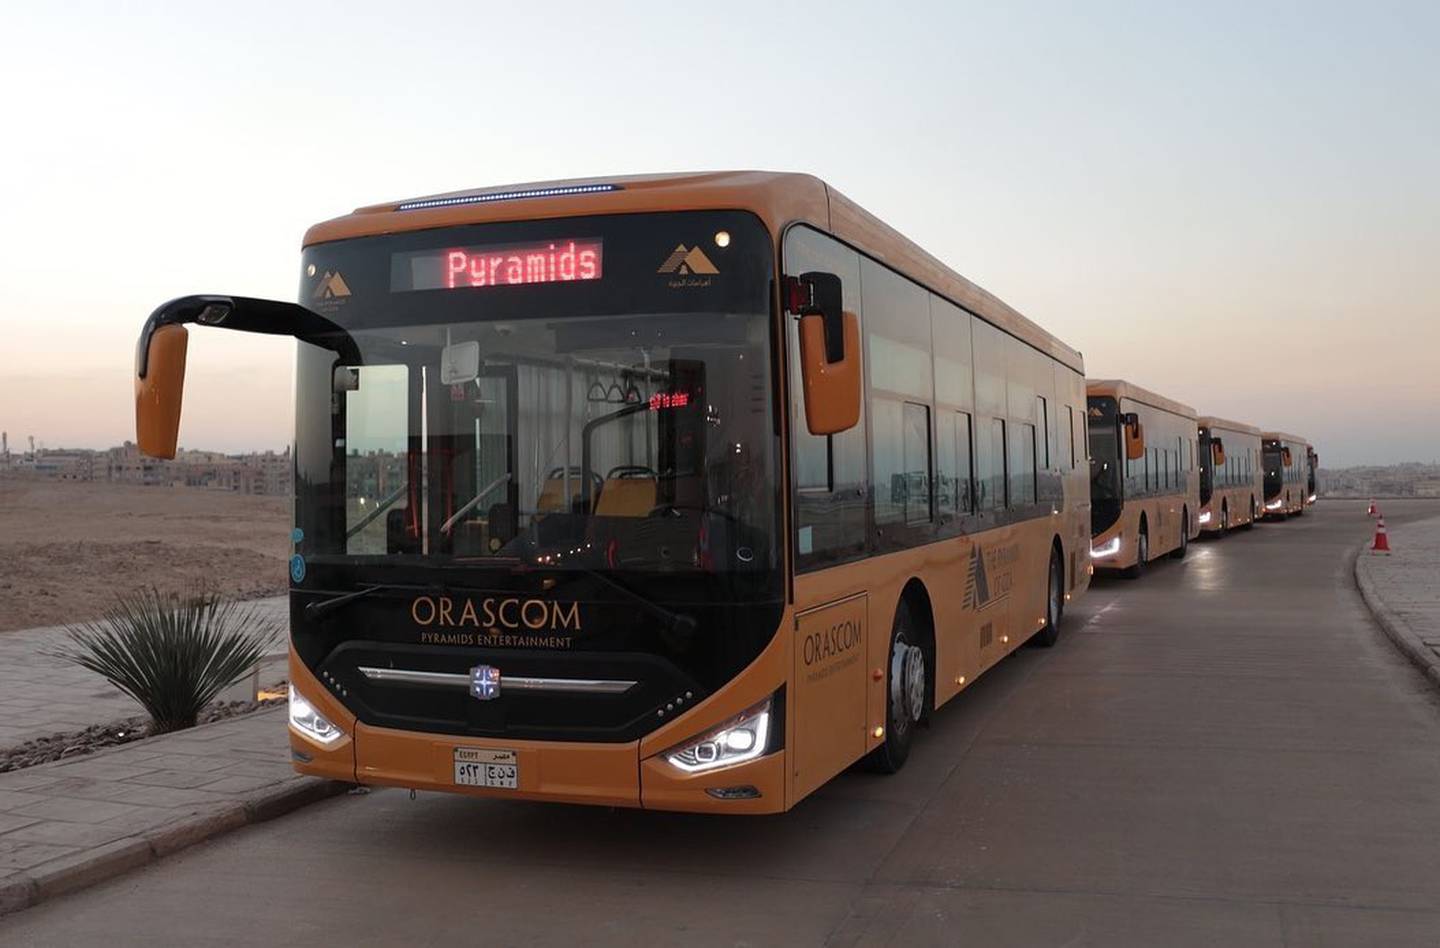 An electric bus on the Giza plateau. One of many that are expected to make transport to the much-visited area more sustainable.